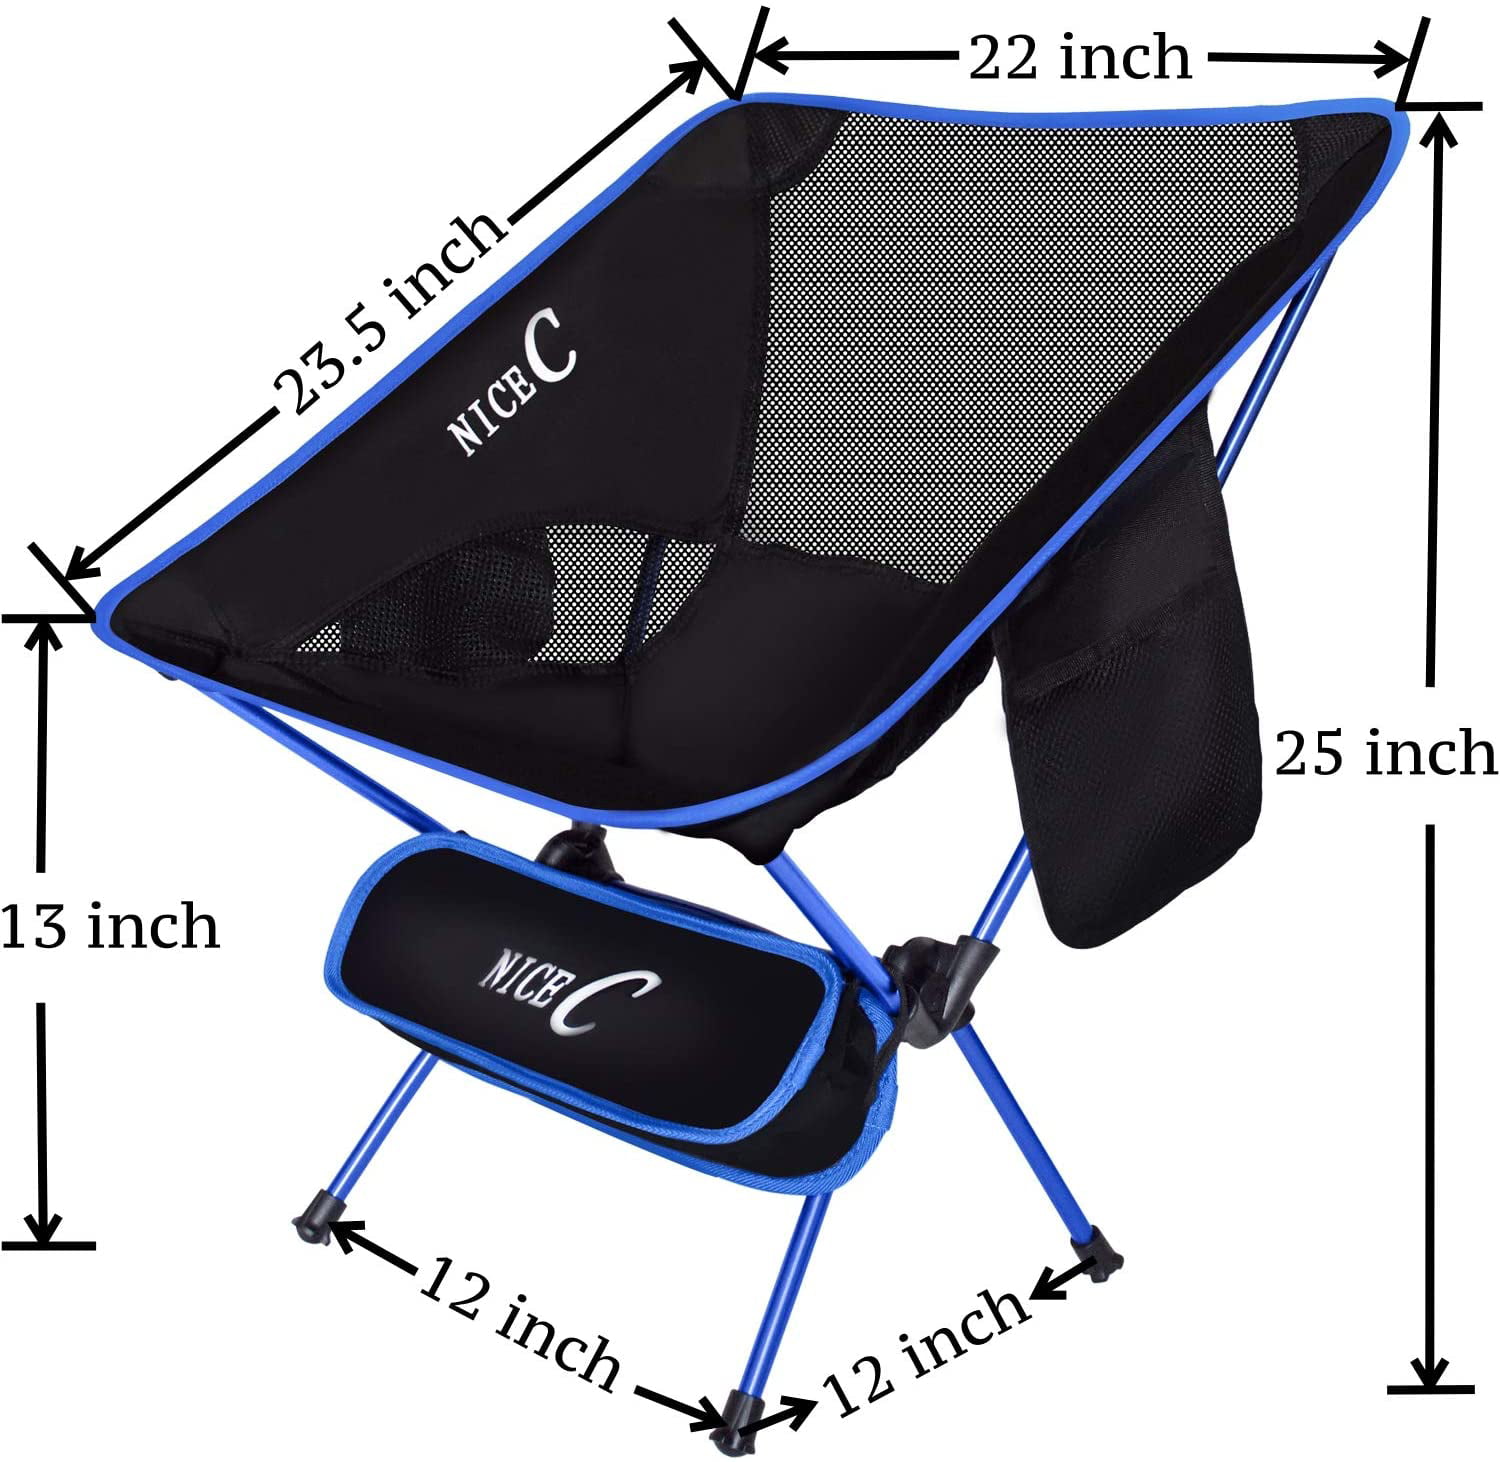 Festival with 2 Storage Bags&Carry Bag Camping Picnic Beach BBQ Travel Nice C Ultralight Portable Folding Camping Backpacking Chair Compact & Heavy Duty Outdoor 